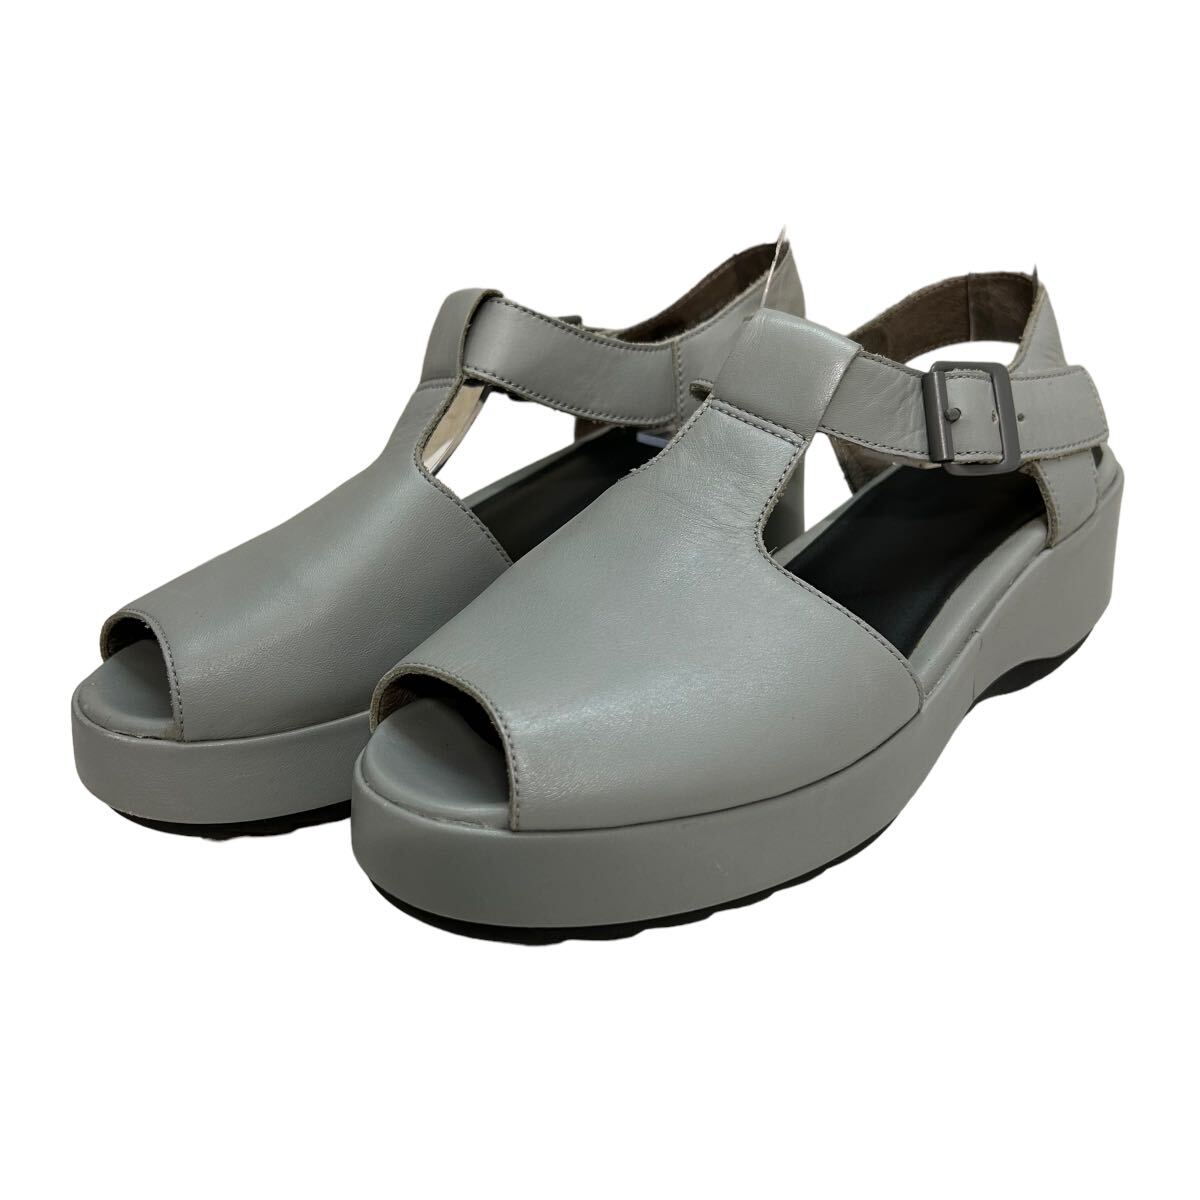 A777 CAMPER Camper lady's strap sandals 35 approximately 22.5cm light gray leather excellent 